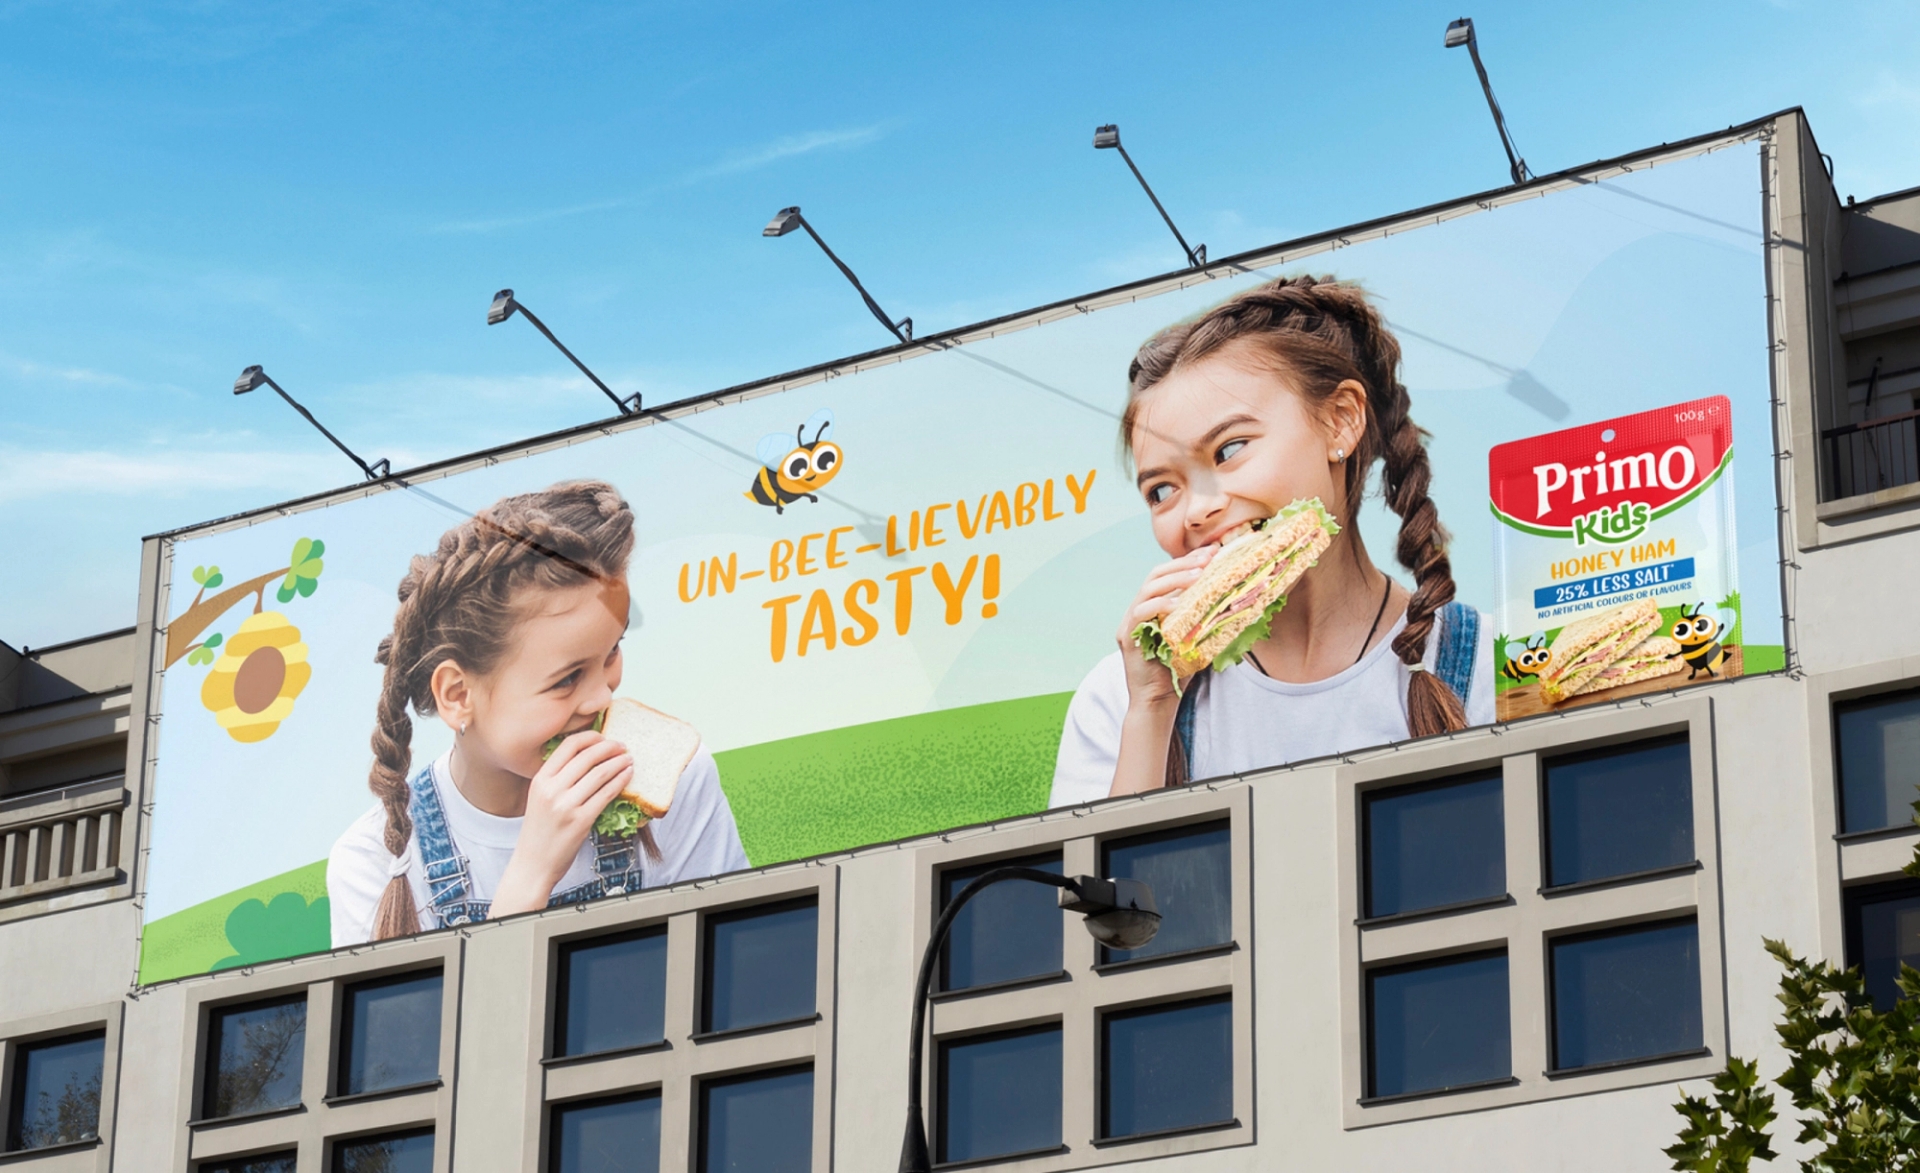 Billboard Primo advert design featuring slogan “un-bee-lievably tasty!” next to a child eating a sandwich and a cartoon illustration of a bee.